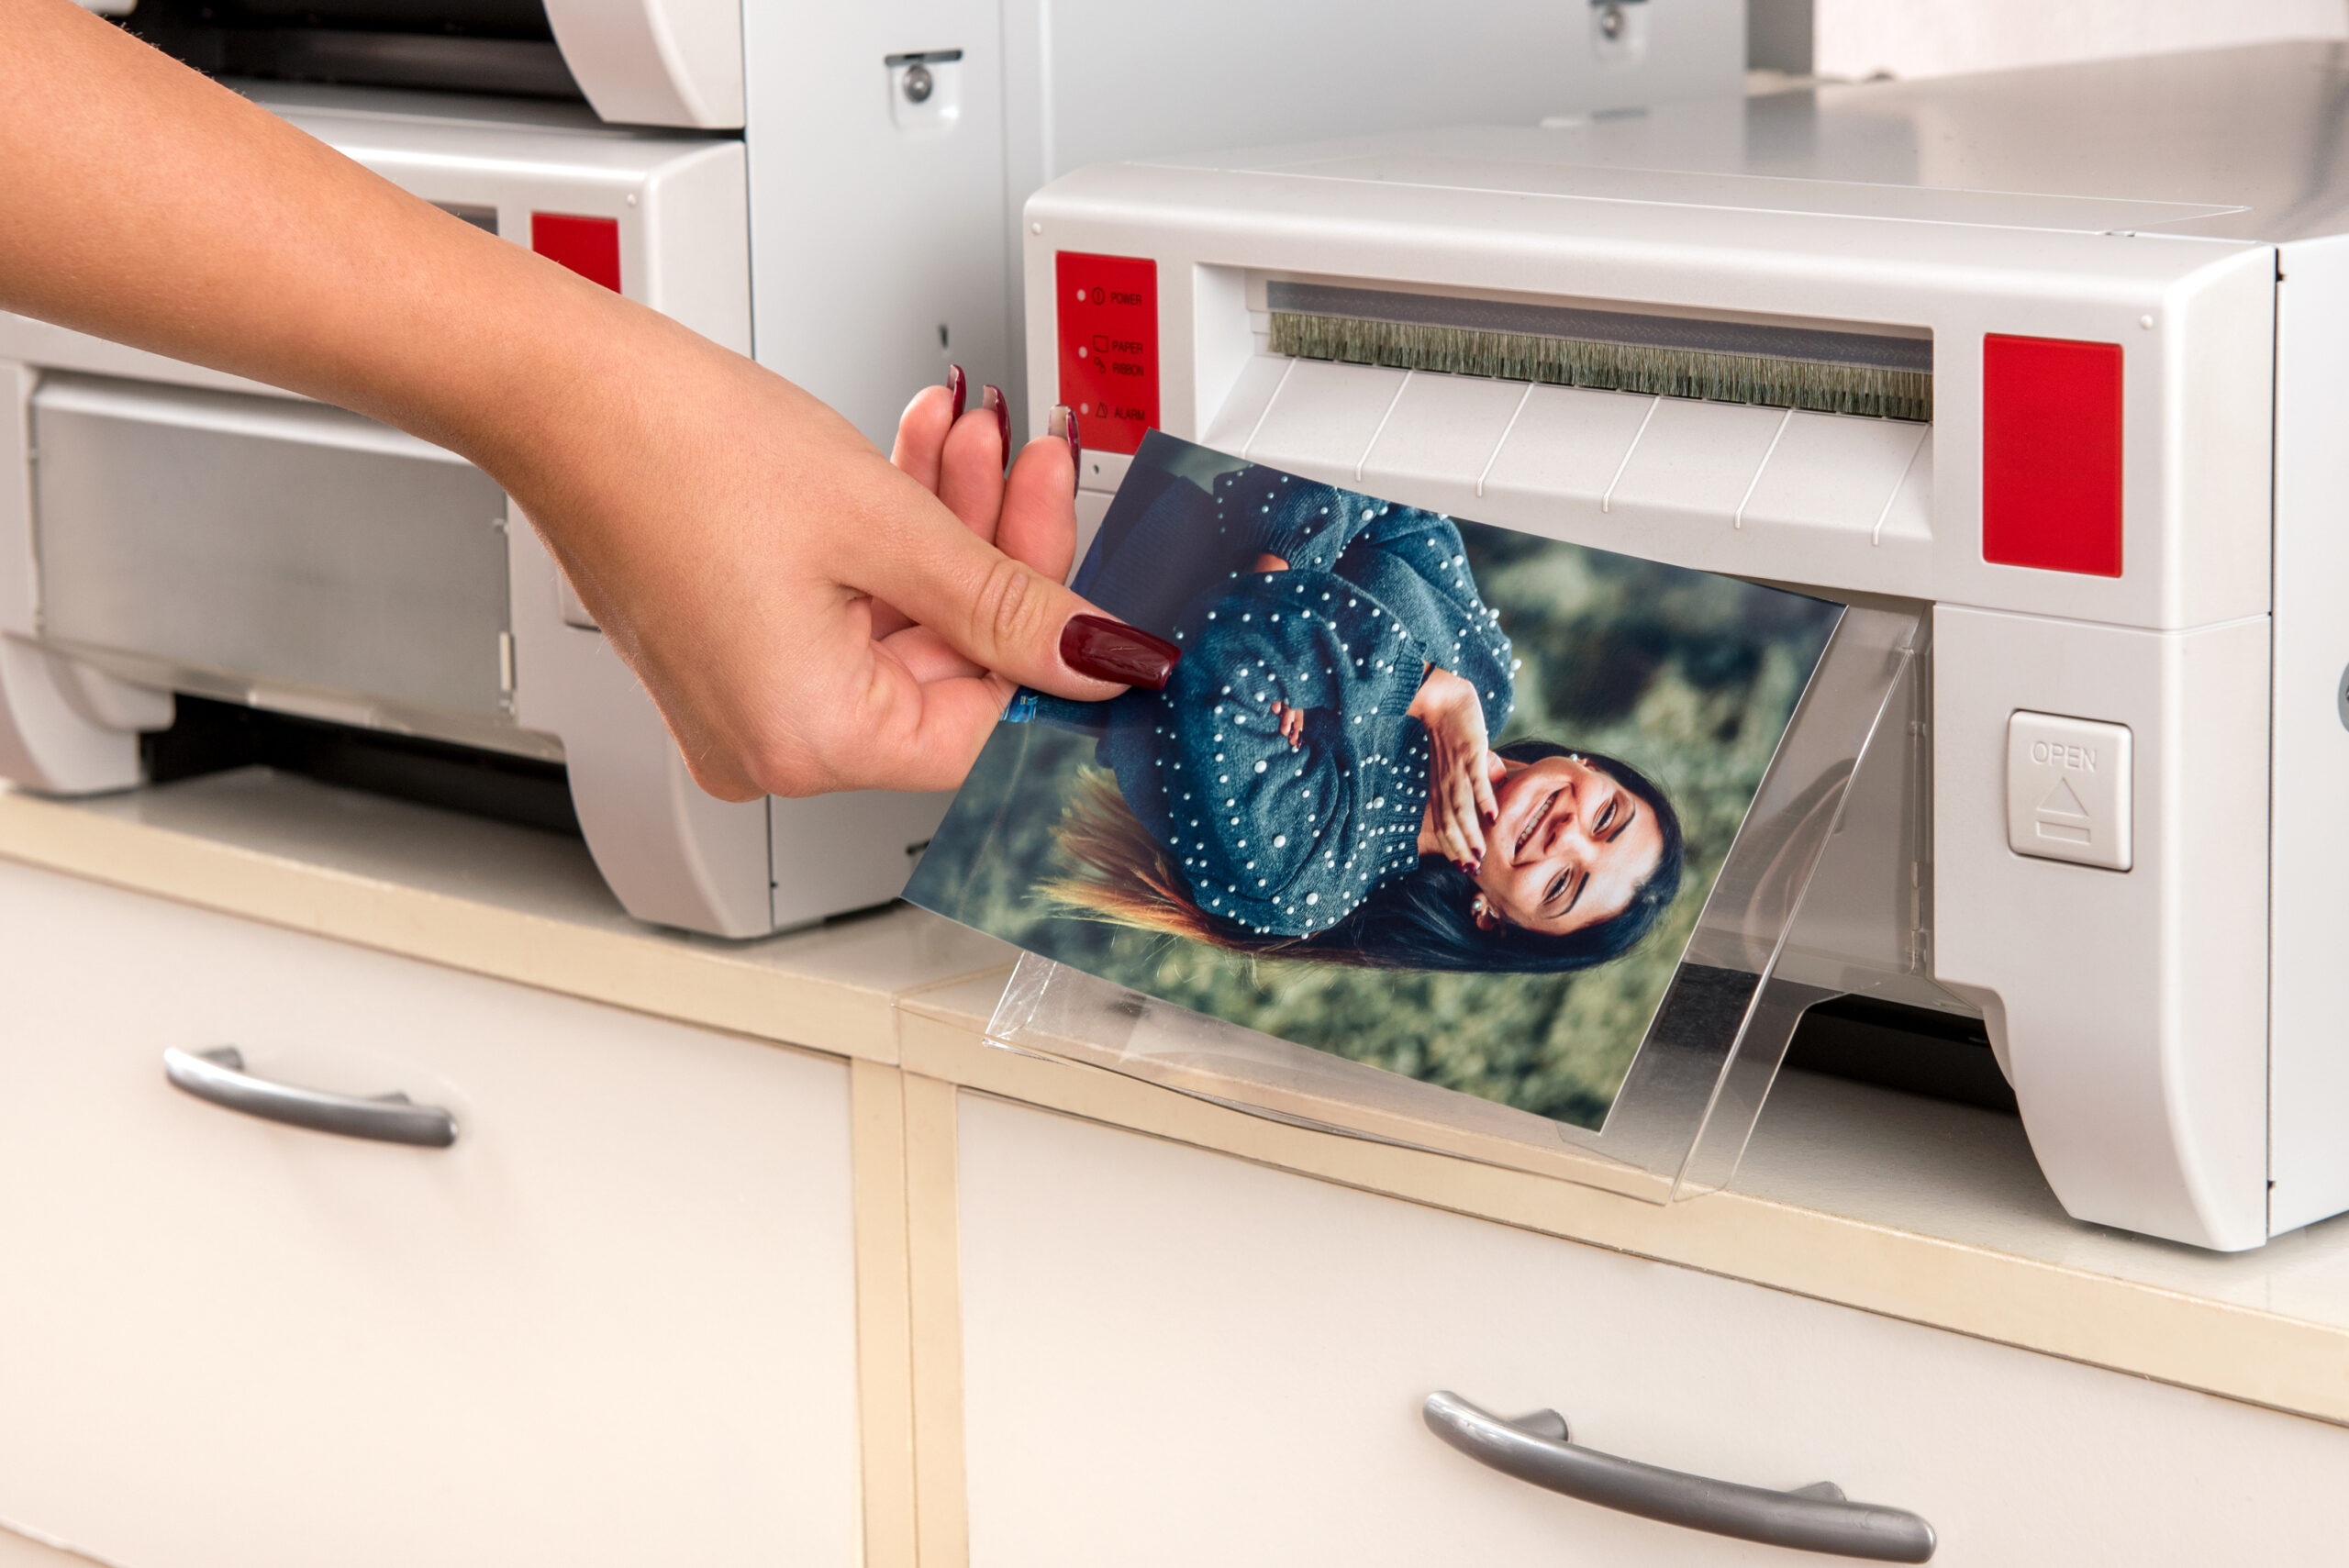 Woman taking a print of a woman from a printer